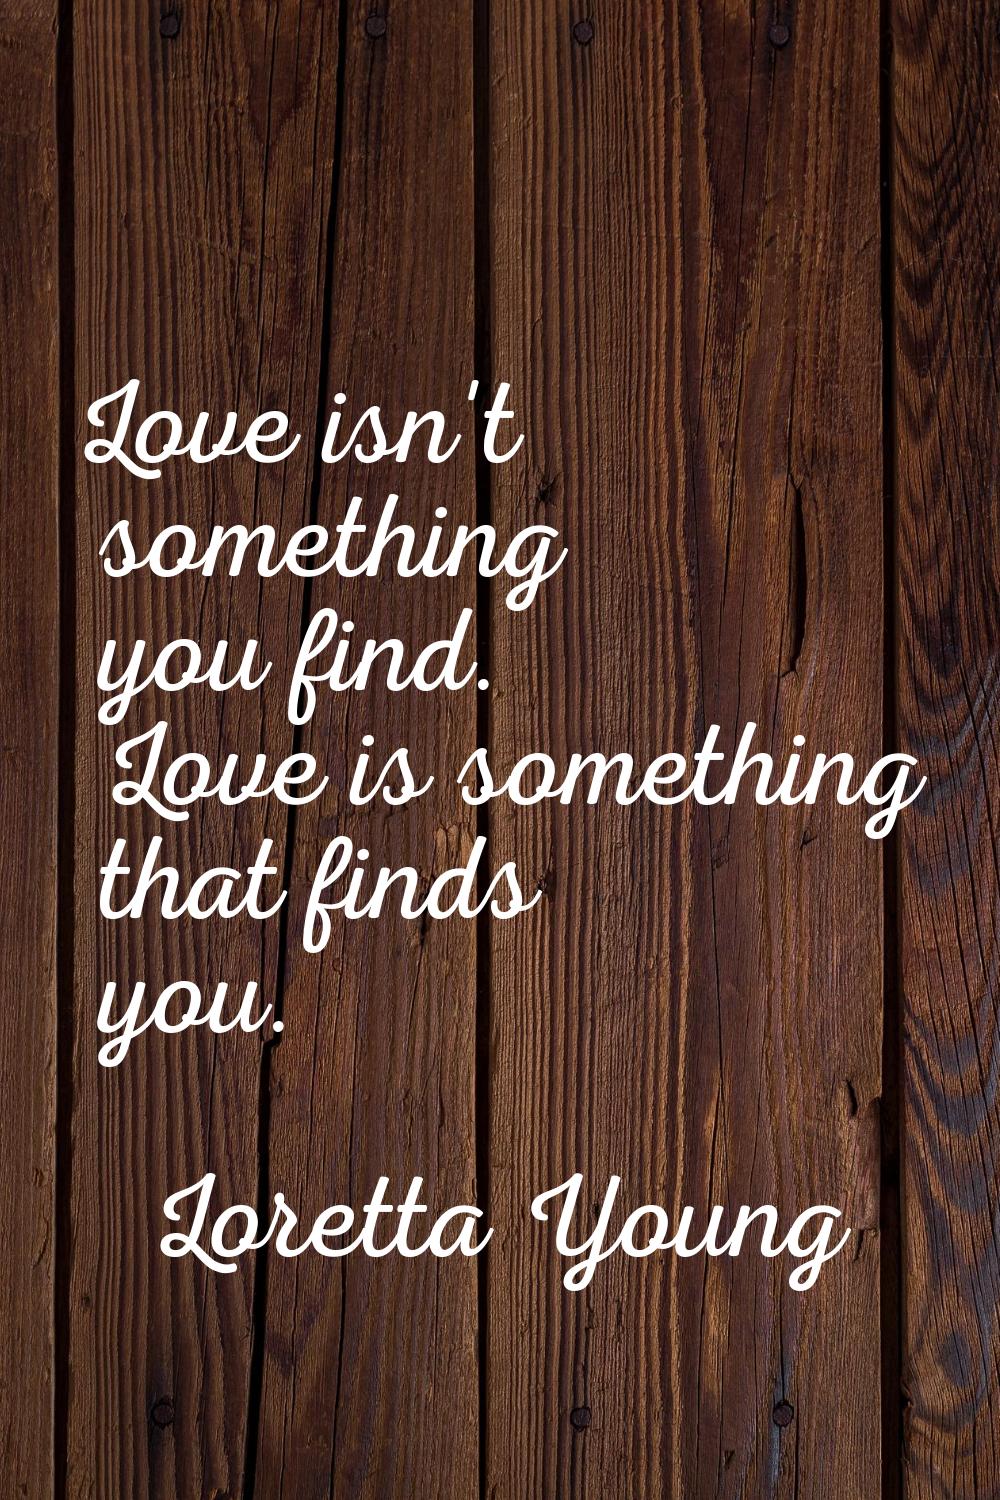 Love isn't something you find. Love is something that finds you.